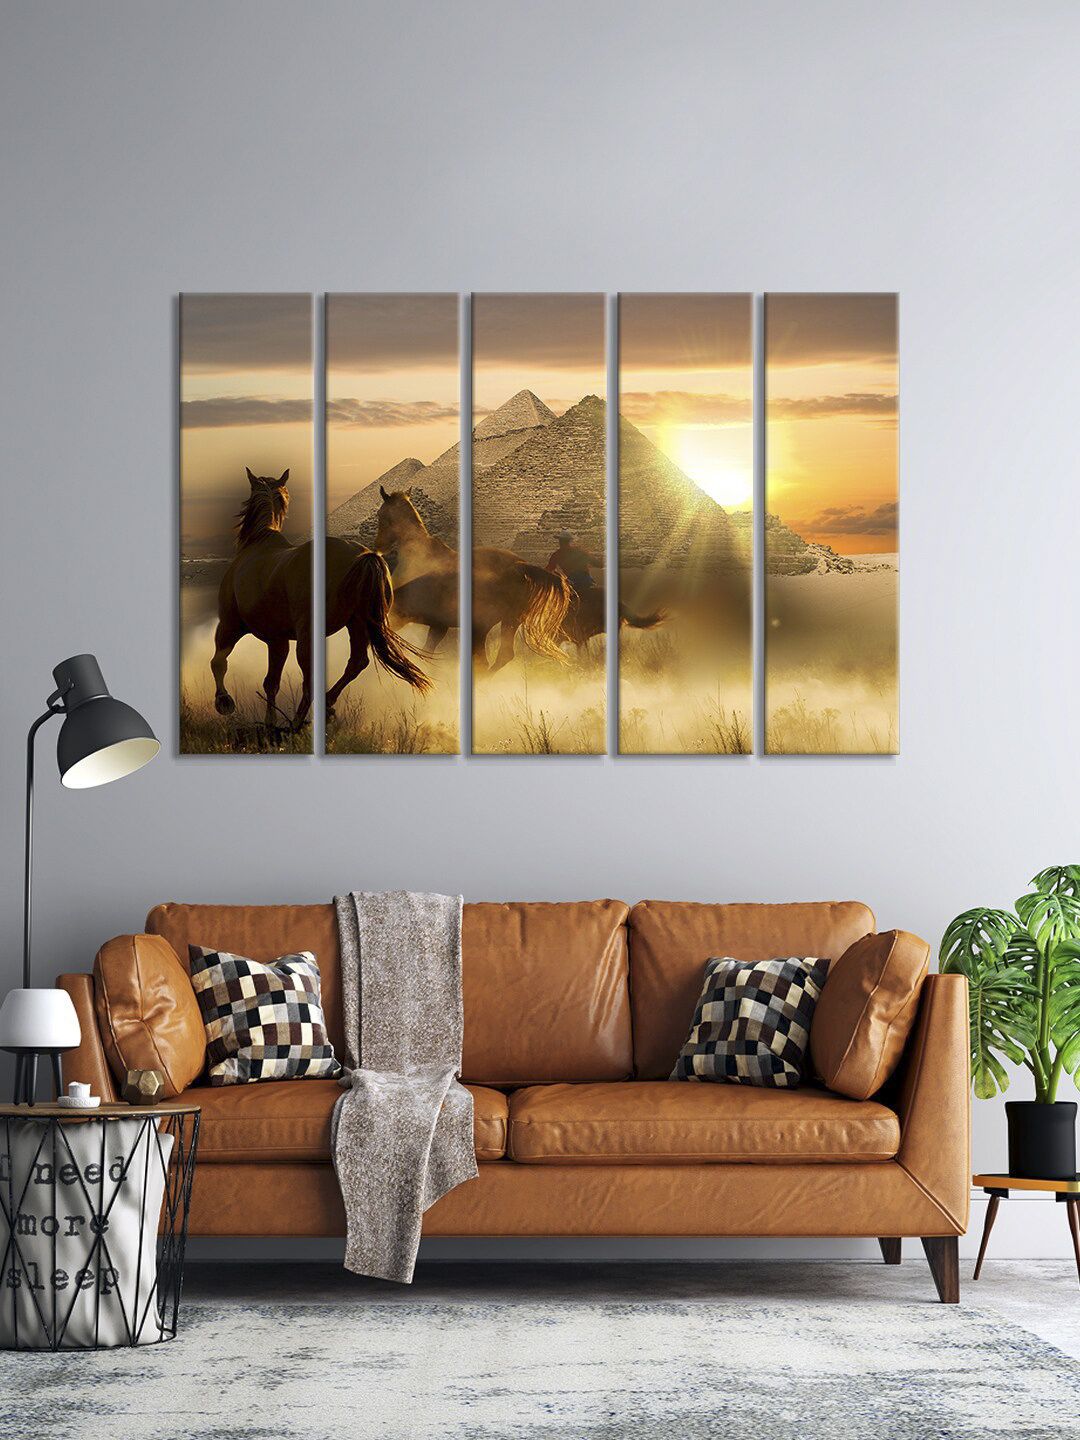 999Store Set Of 5 Brown Running Horse Near Pyramids In Egyptian Wall Painting Wall Hanging Price in India